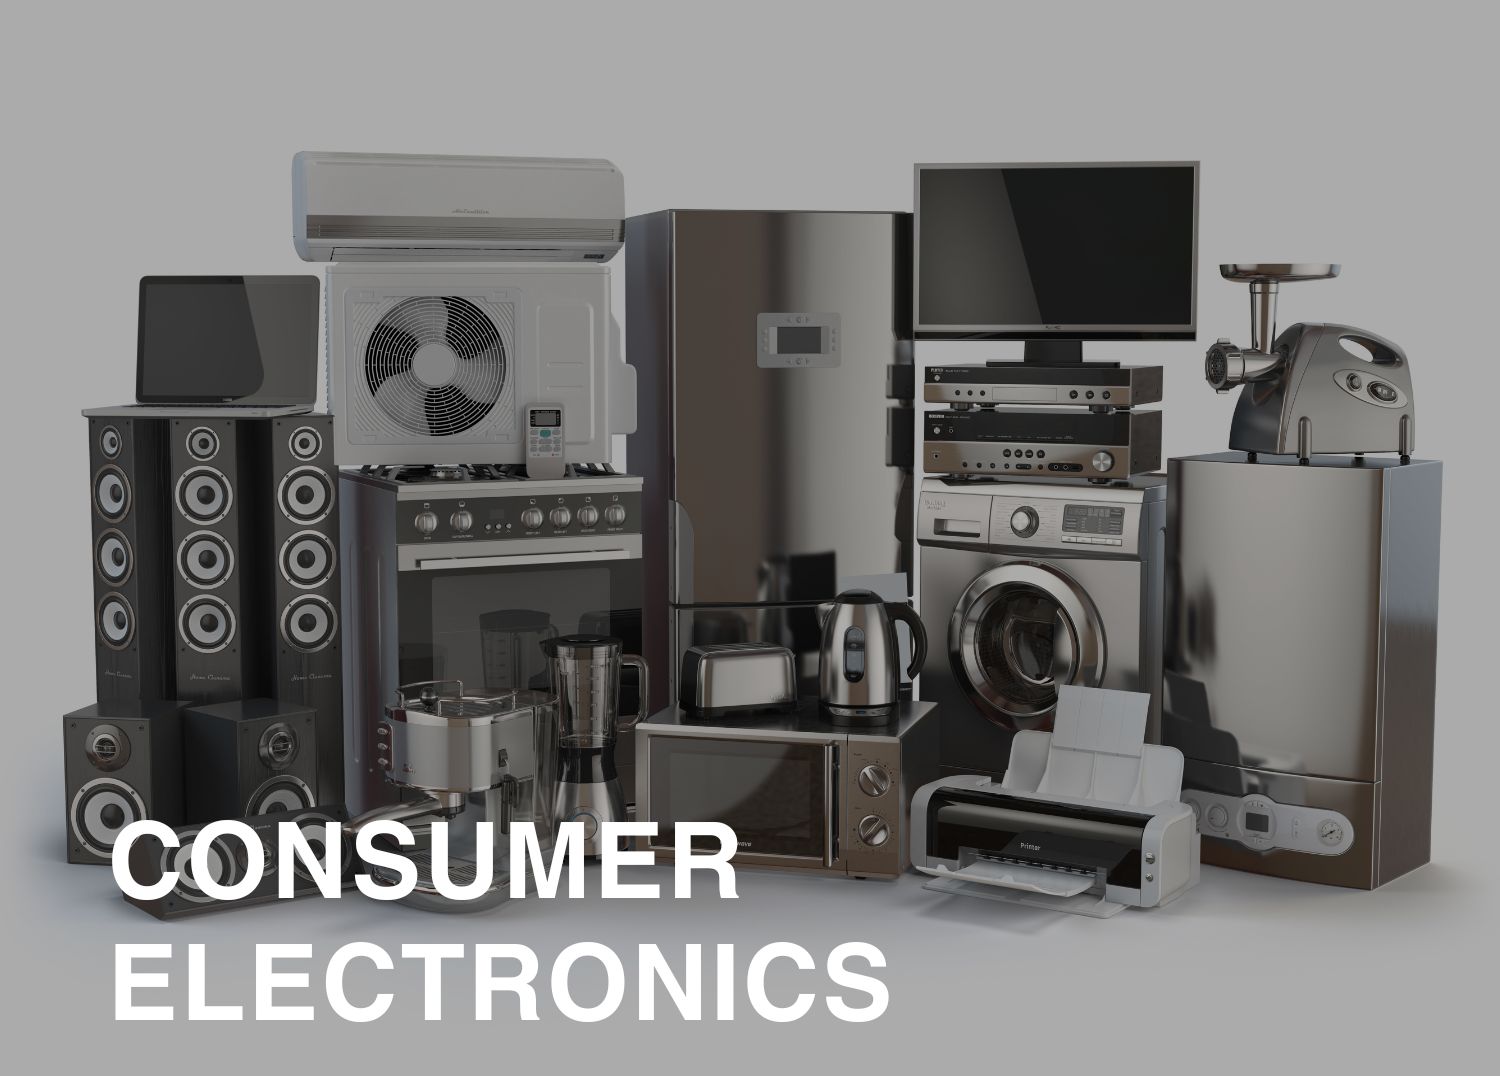 consumer electroics industry